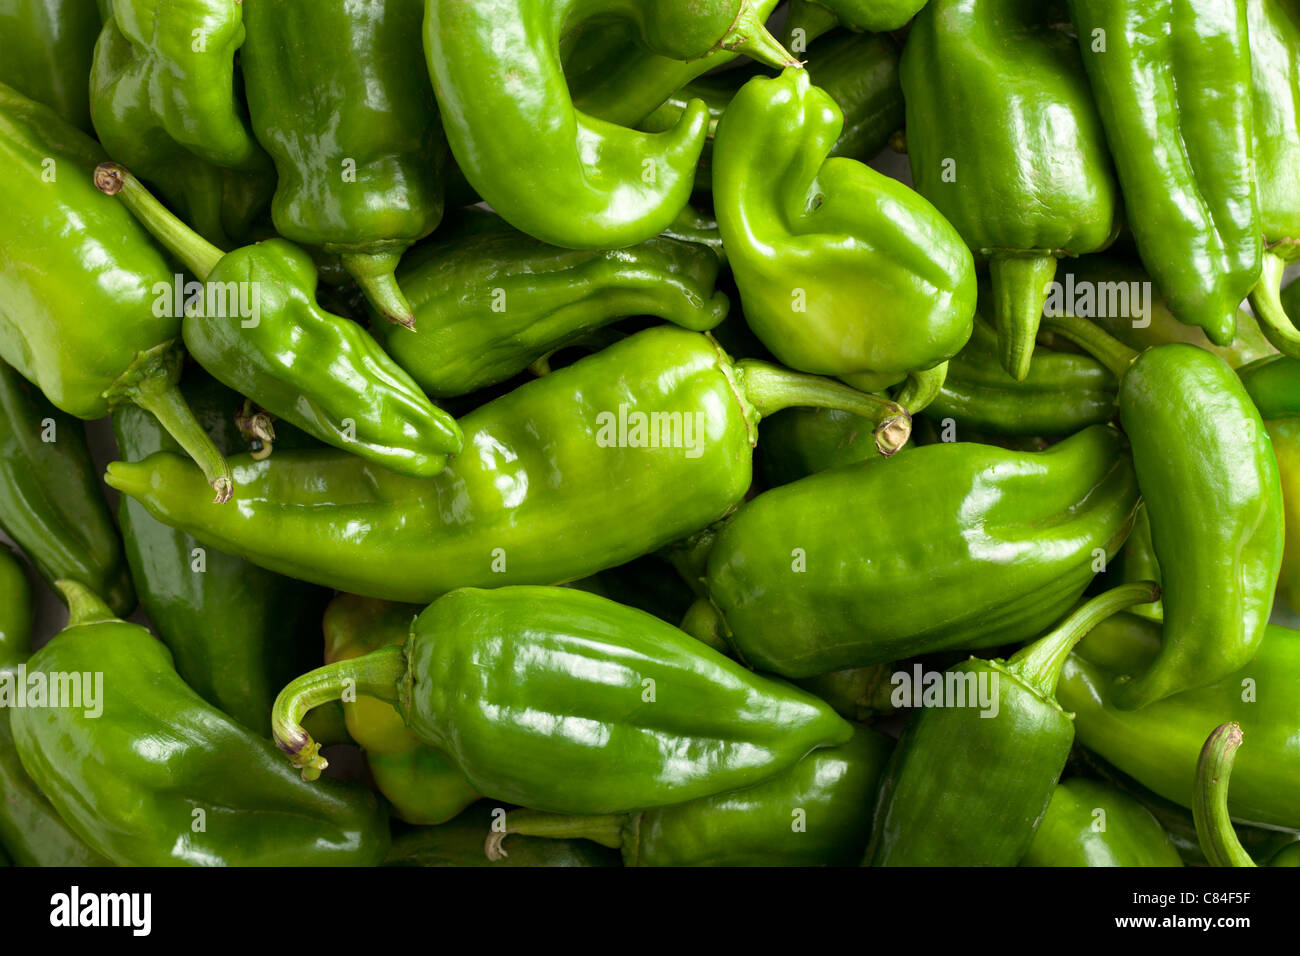 Green Bell Peppers Stock Photo